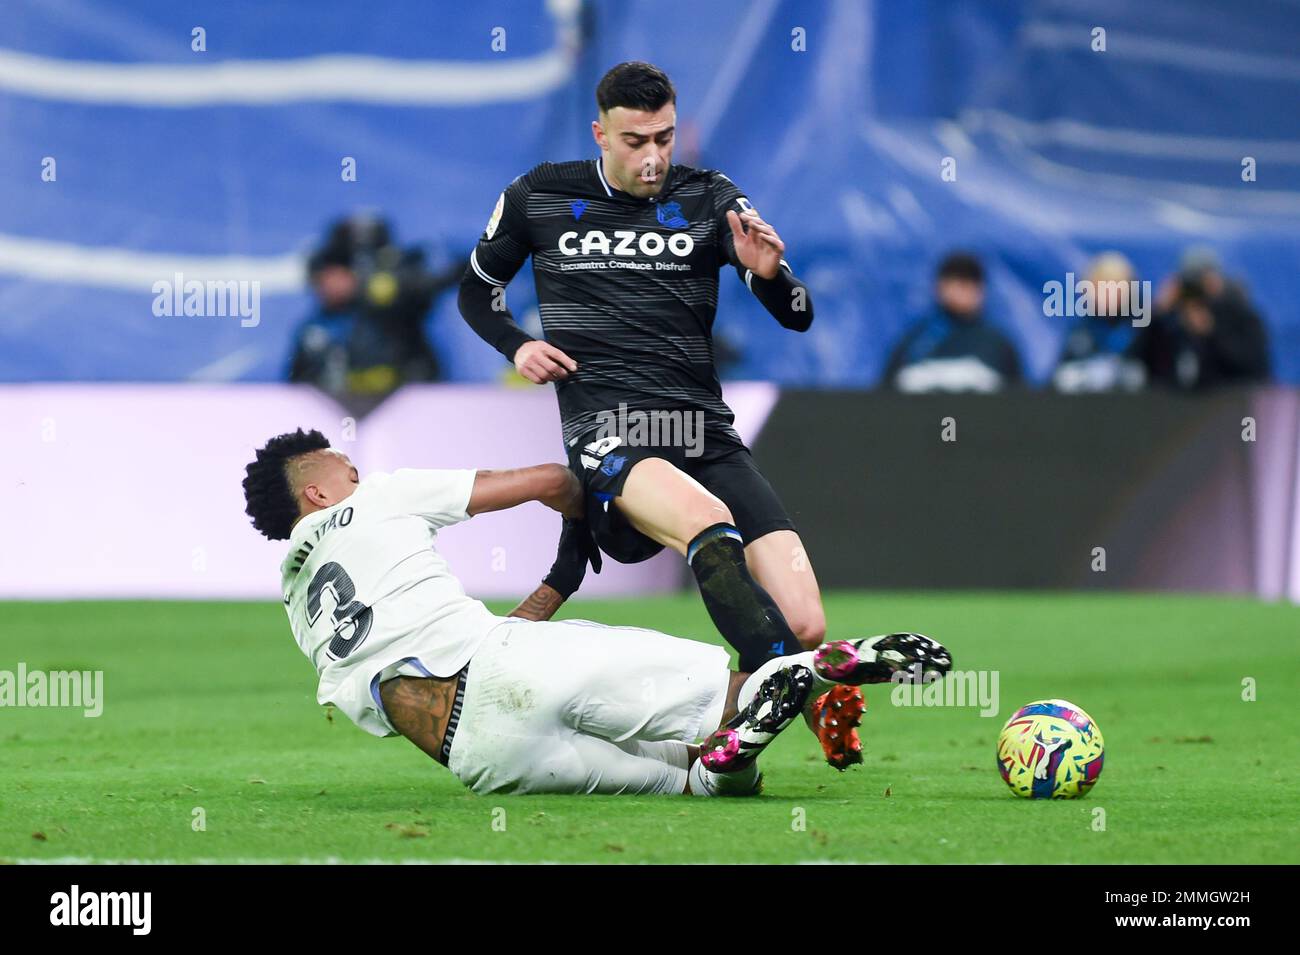 Madrid, Spain. 29th Jan, 2023. Eder Militao (L) of Real Madrid vies with Diego Rico of Real Sociedad during a Spanish La Liga football match between Real Madrid and Real Sociedad in Madrid, Spain, Jan. 29, 2023. Credit: Gustavo Valiente/Xinhua/Alamy Live News Stock Photo